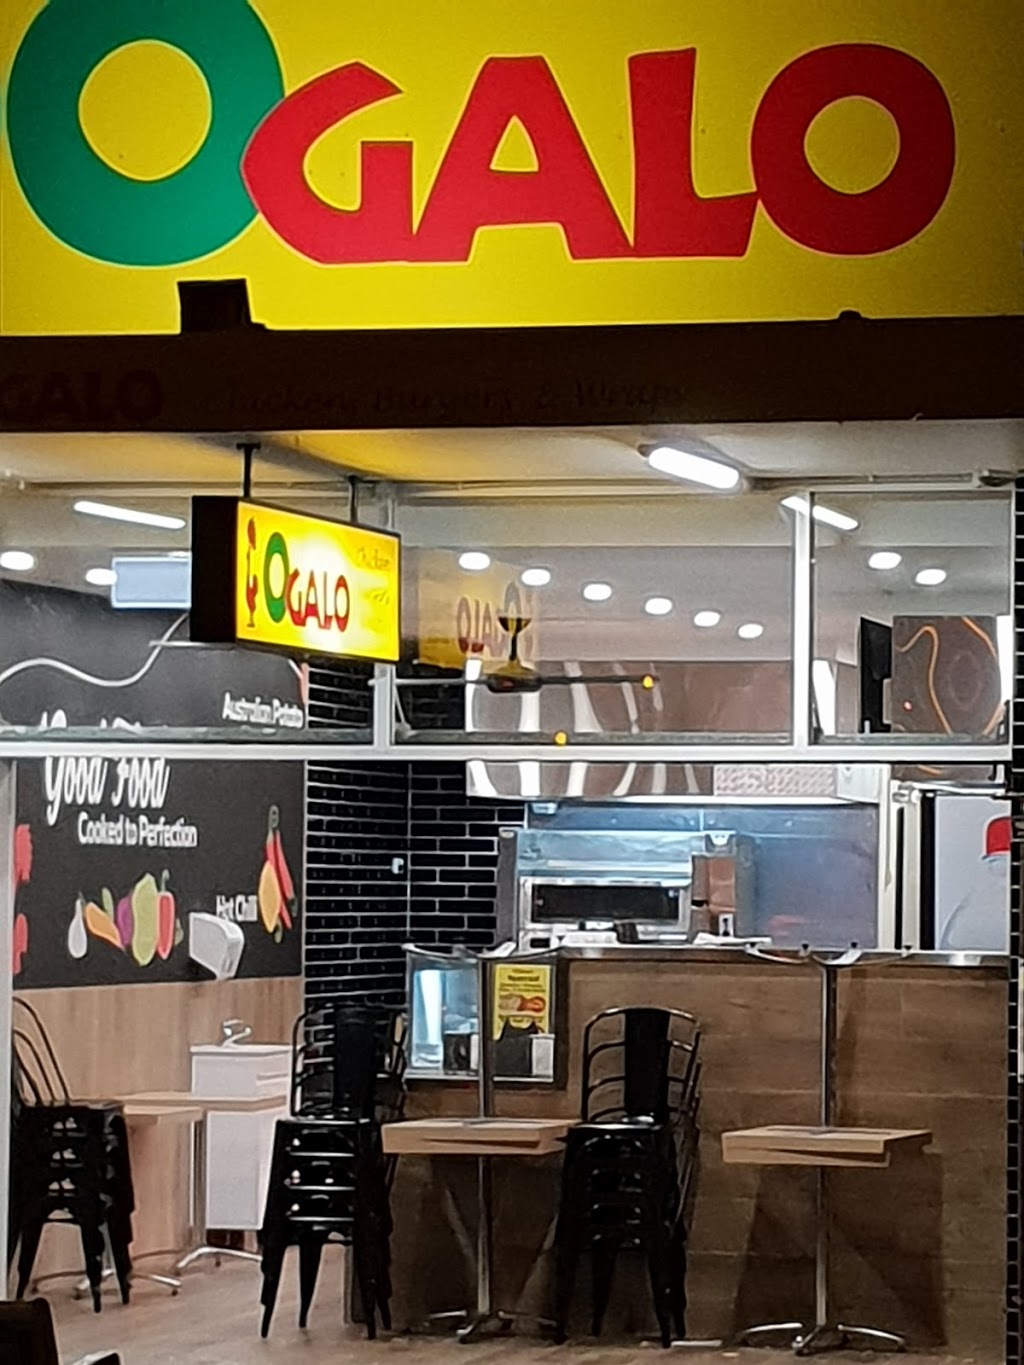 Ogalo Frenchs Forest | restaurant | Shop 1/18 Frenchs Forest Rd E, Frenchs Forest NSW 2086, Australia | 0294539885 OR +61 2 9453 9885